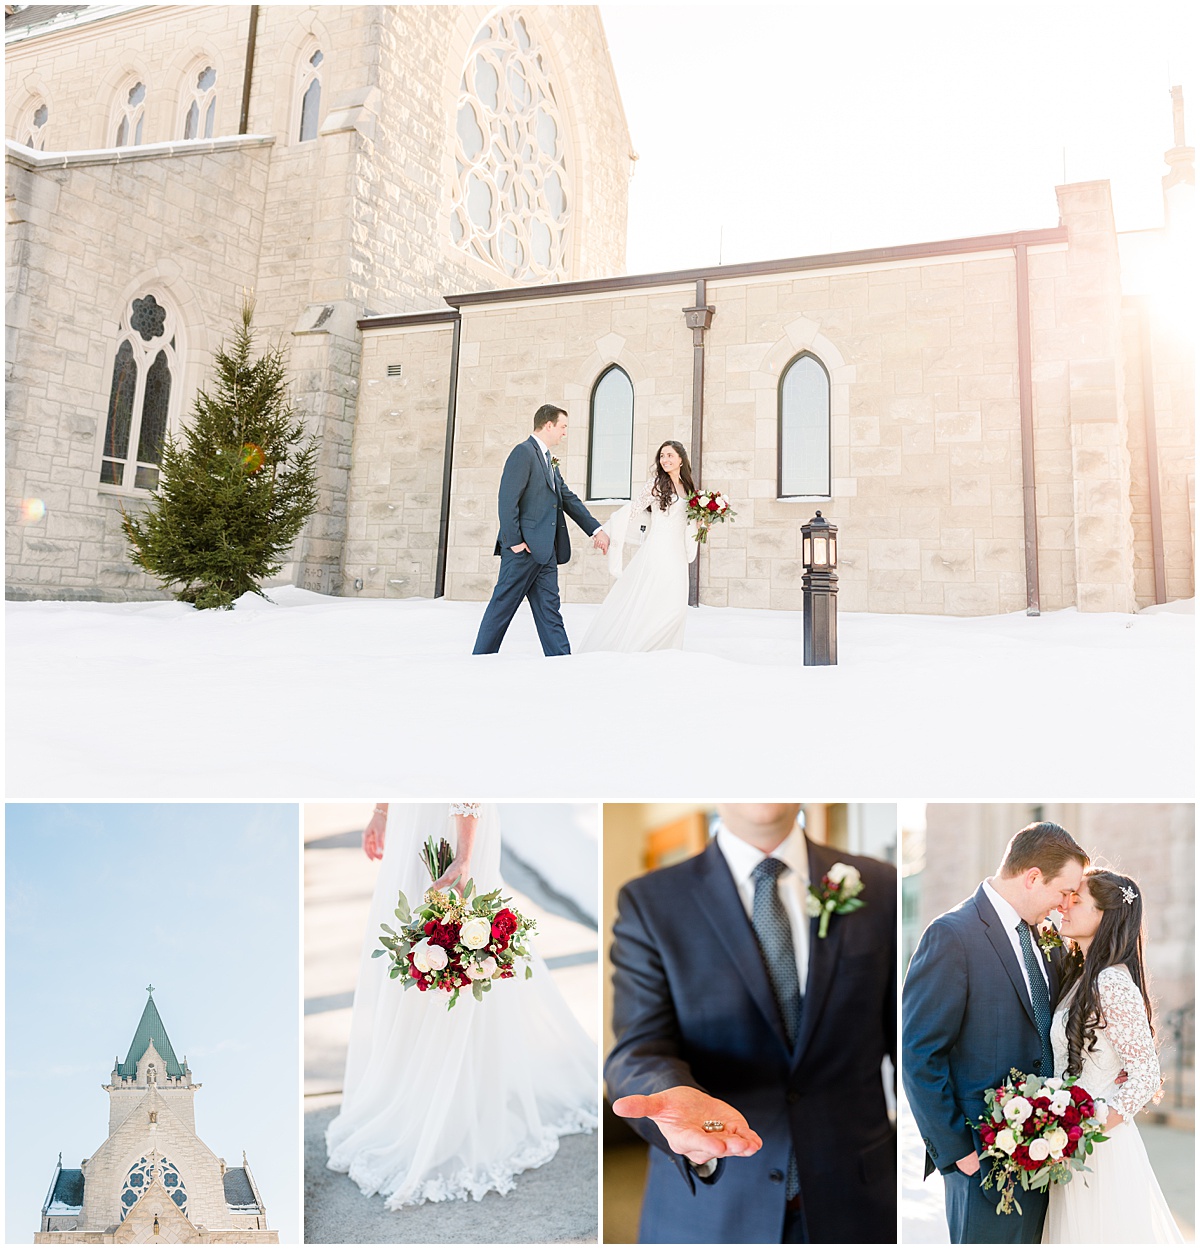 Winter Church ceremony micro wedding at St. Vincent Martyr Church in Madison, New Jersey